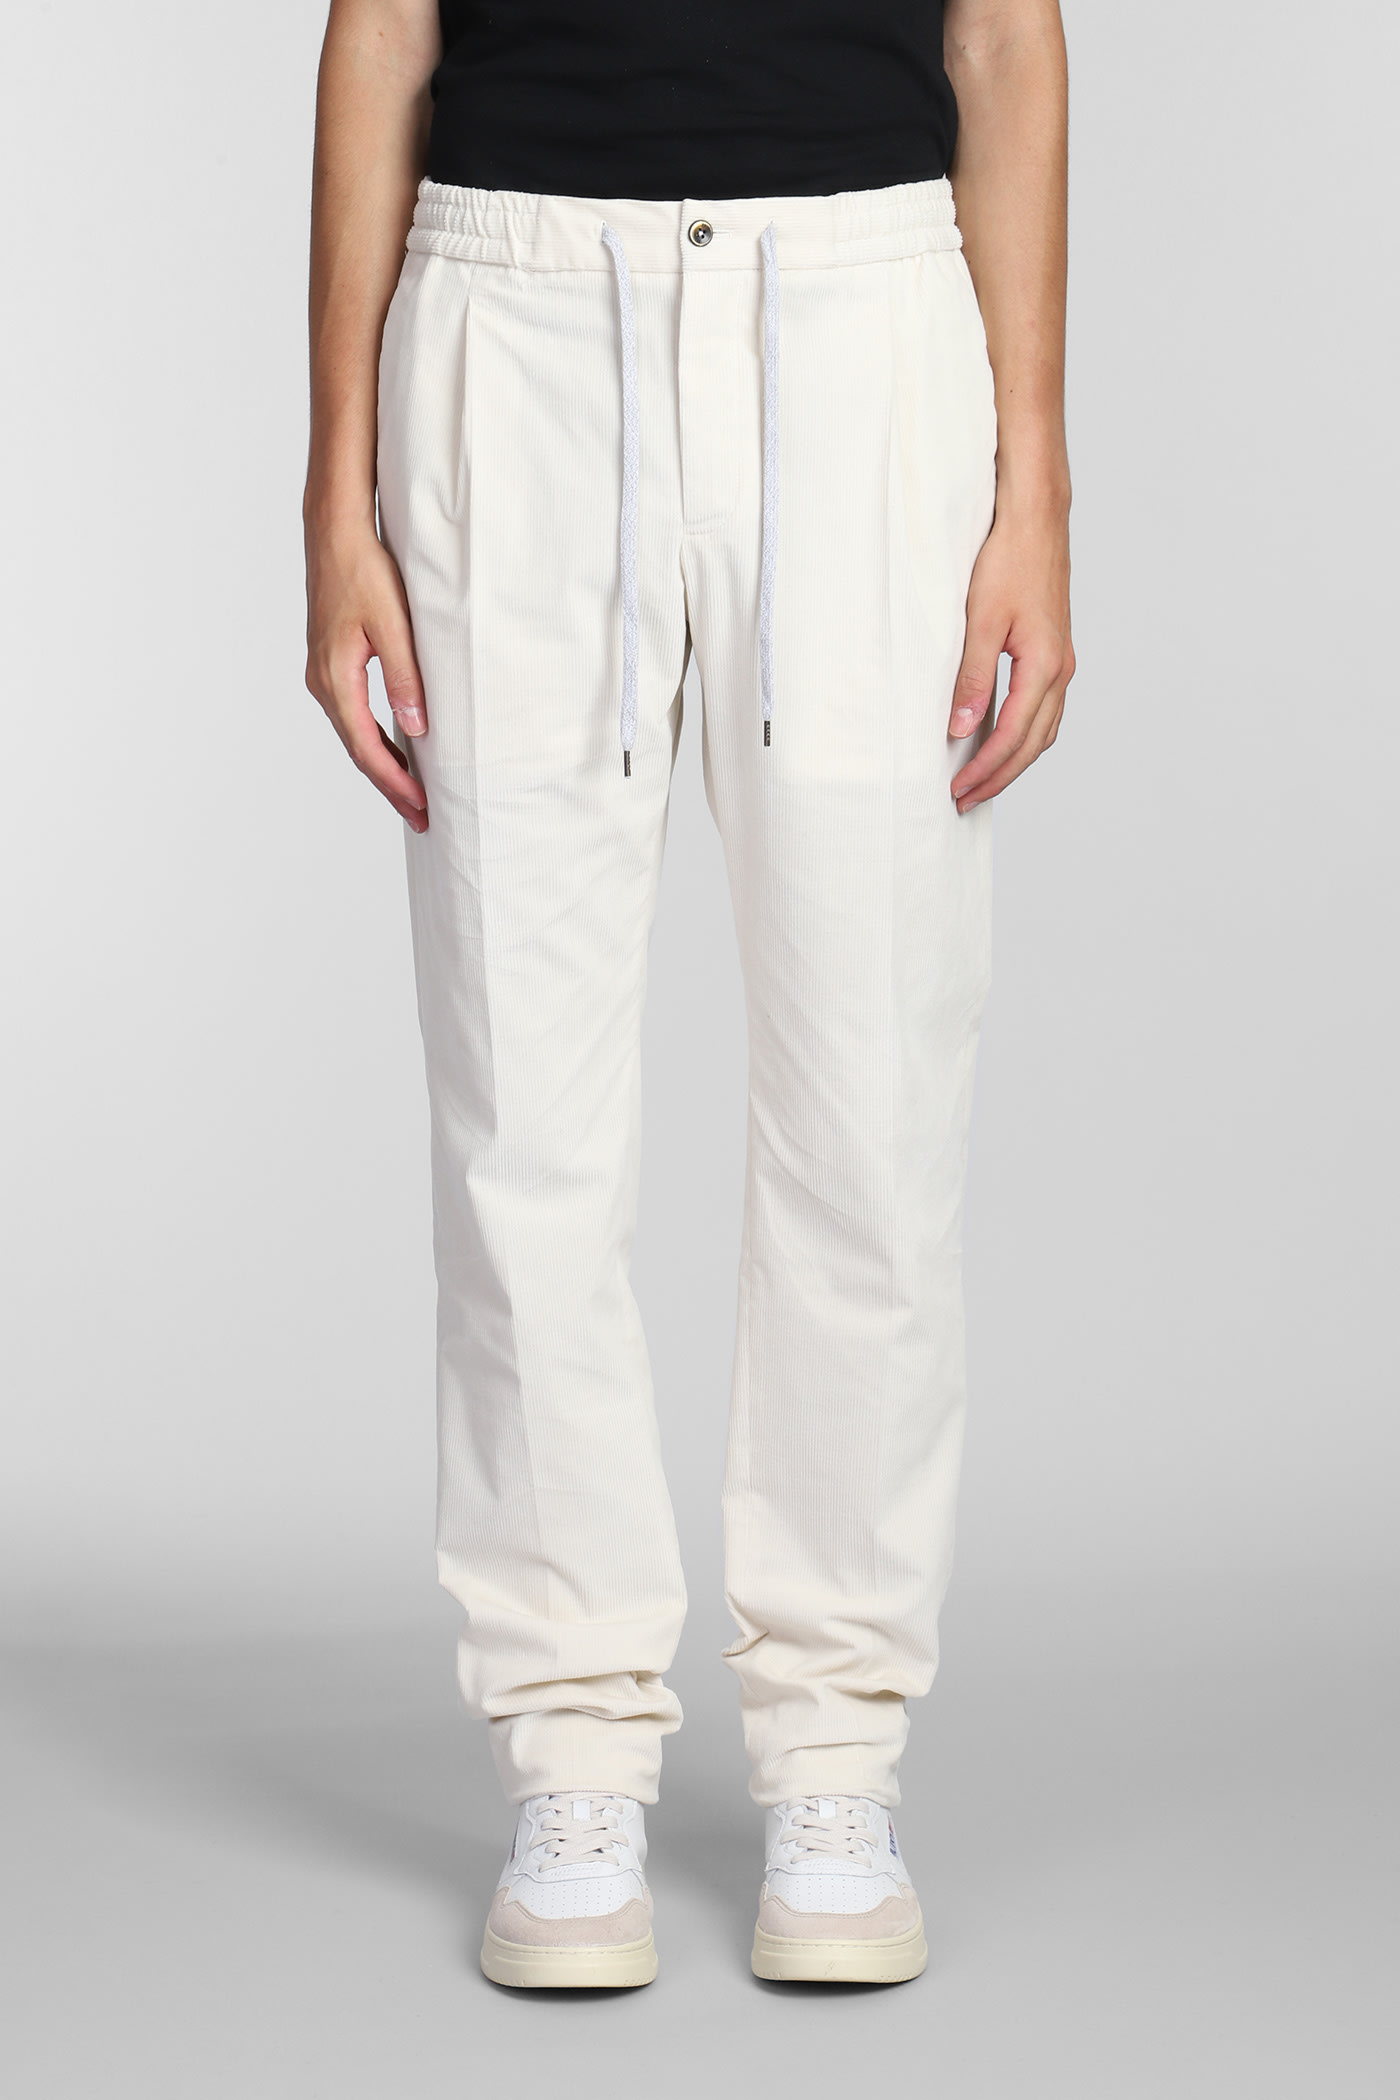 Pt01 Pants In White Cotton